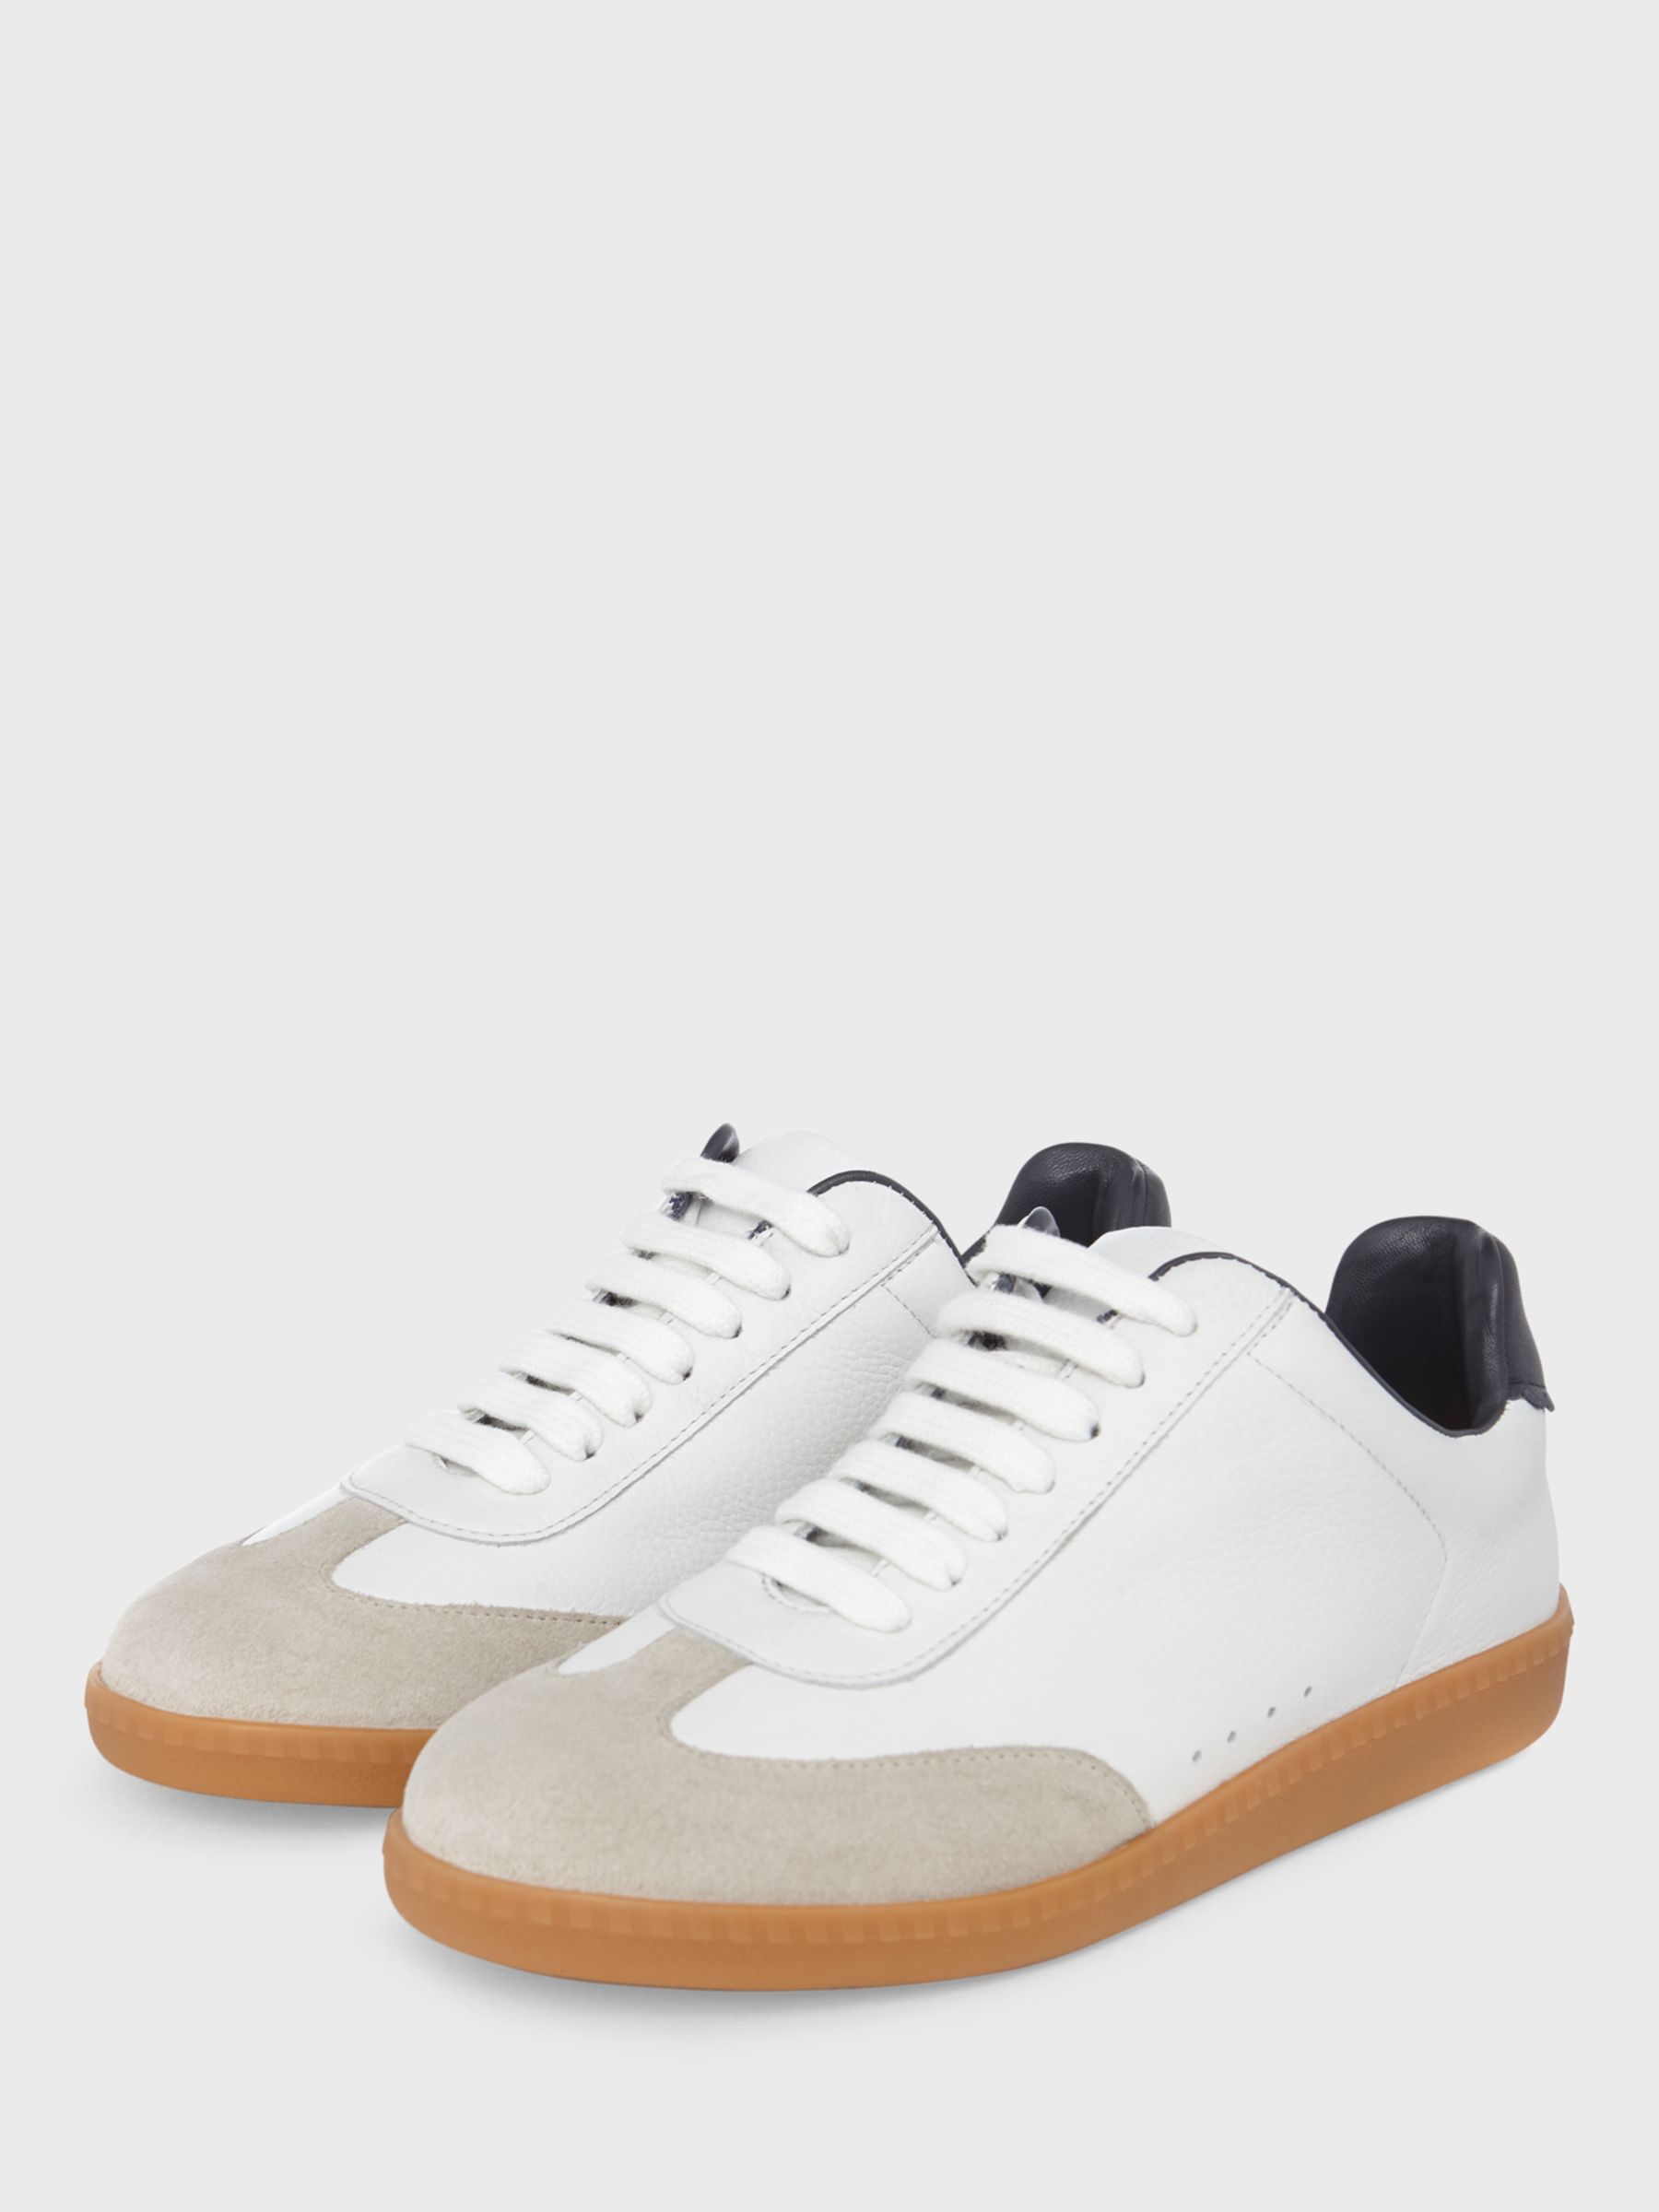 Hobbs Madden Leather Trainers, White/Navy at John Lewis & Partners